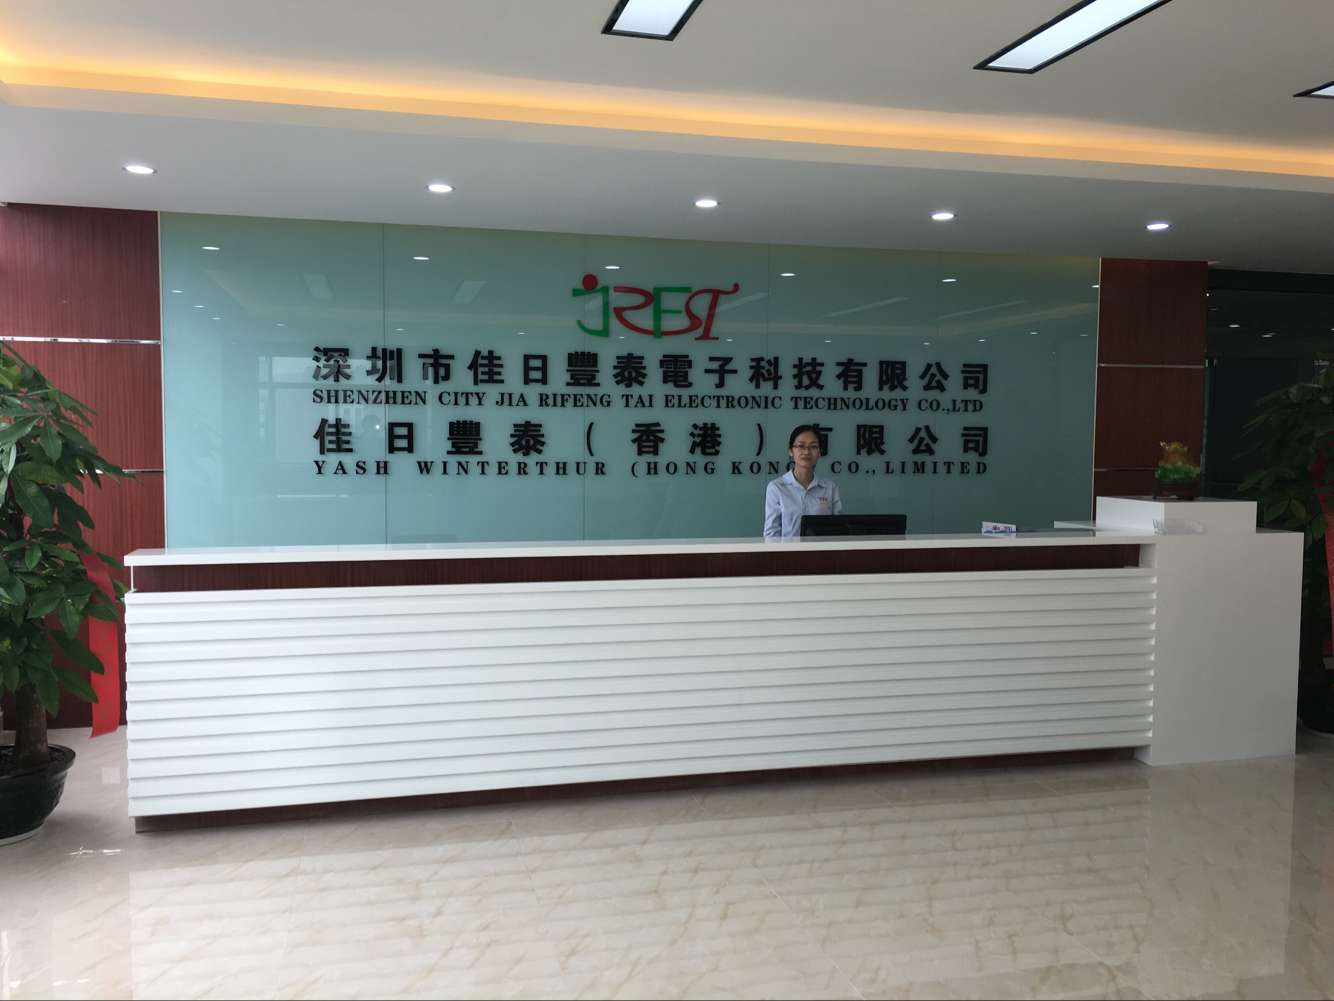 Congratulate Jia Rifeng Tai Company Moved to New Factory in 2016